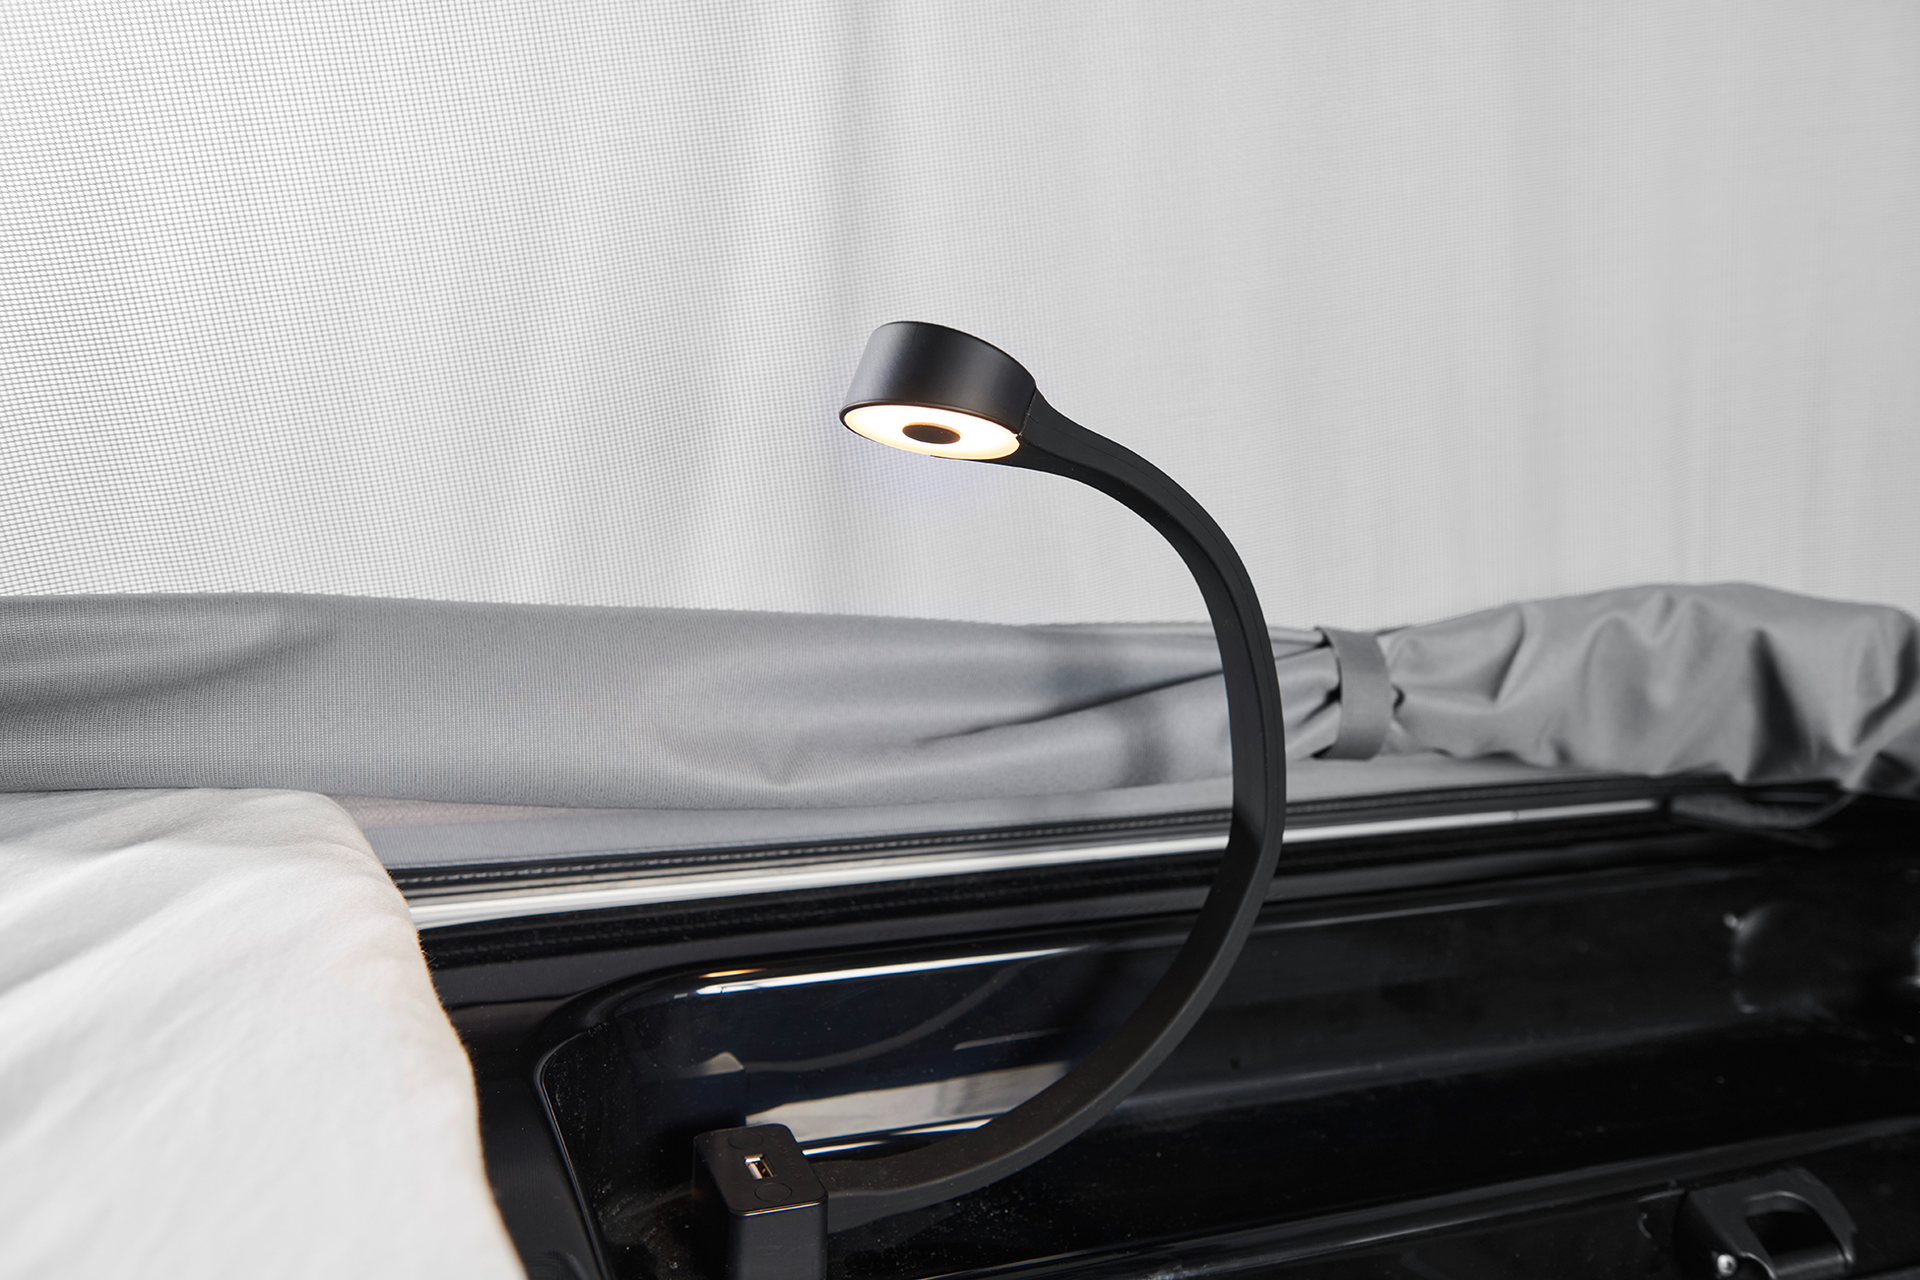 The practical gooseneck light illuminates exactly the right spot. It features economical LED technology and a USB charging port for mobile devices.